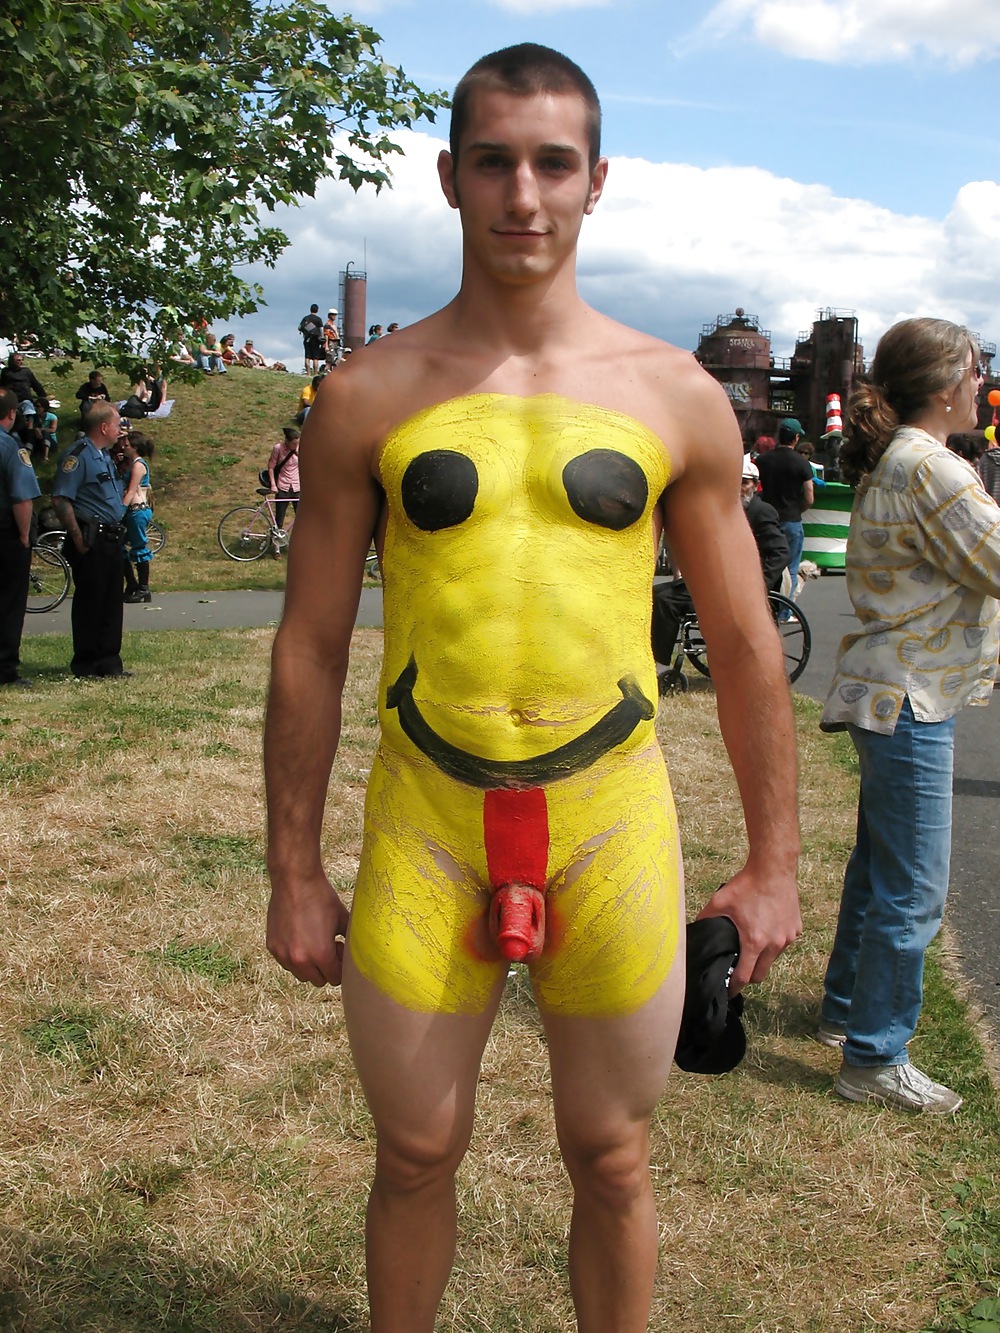 Nude Body Paint Halloween Costumes. amateur nude male body paint pics...